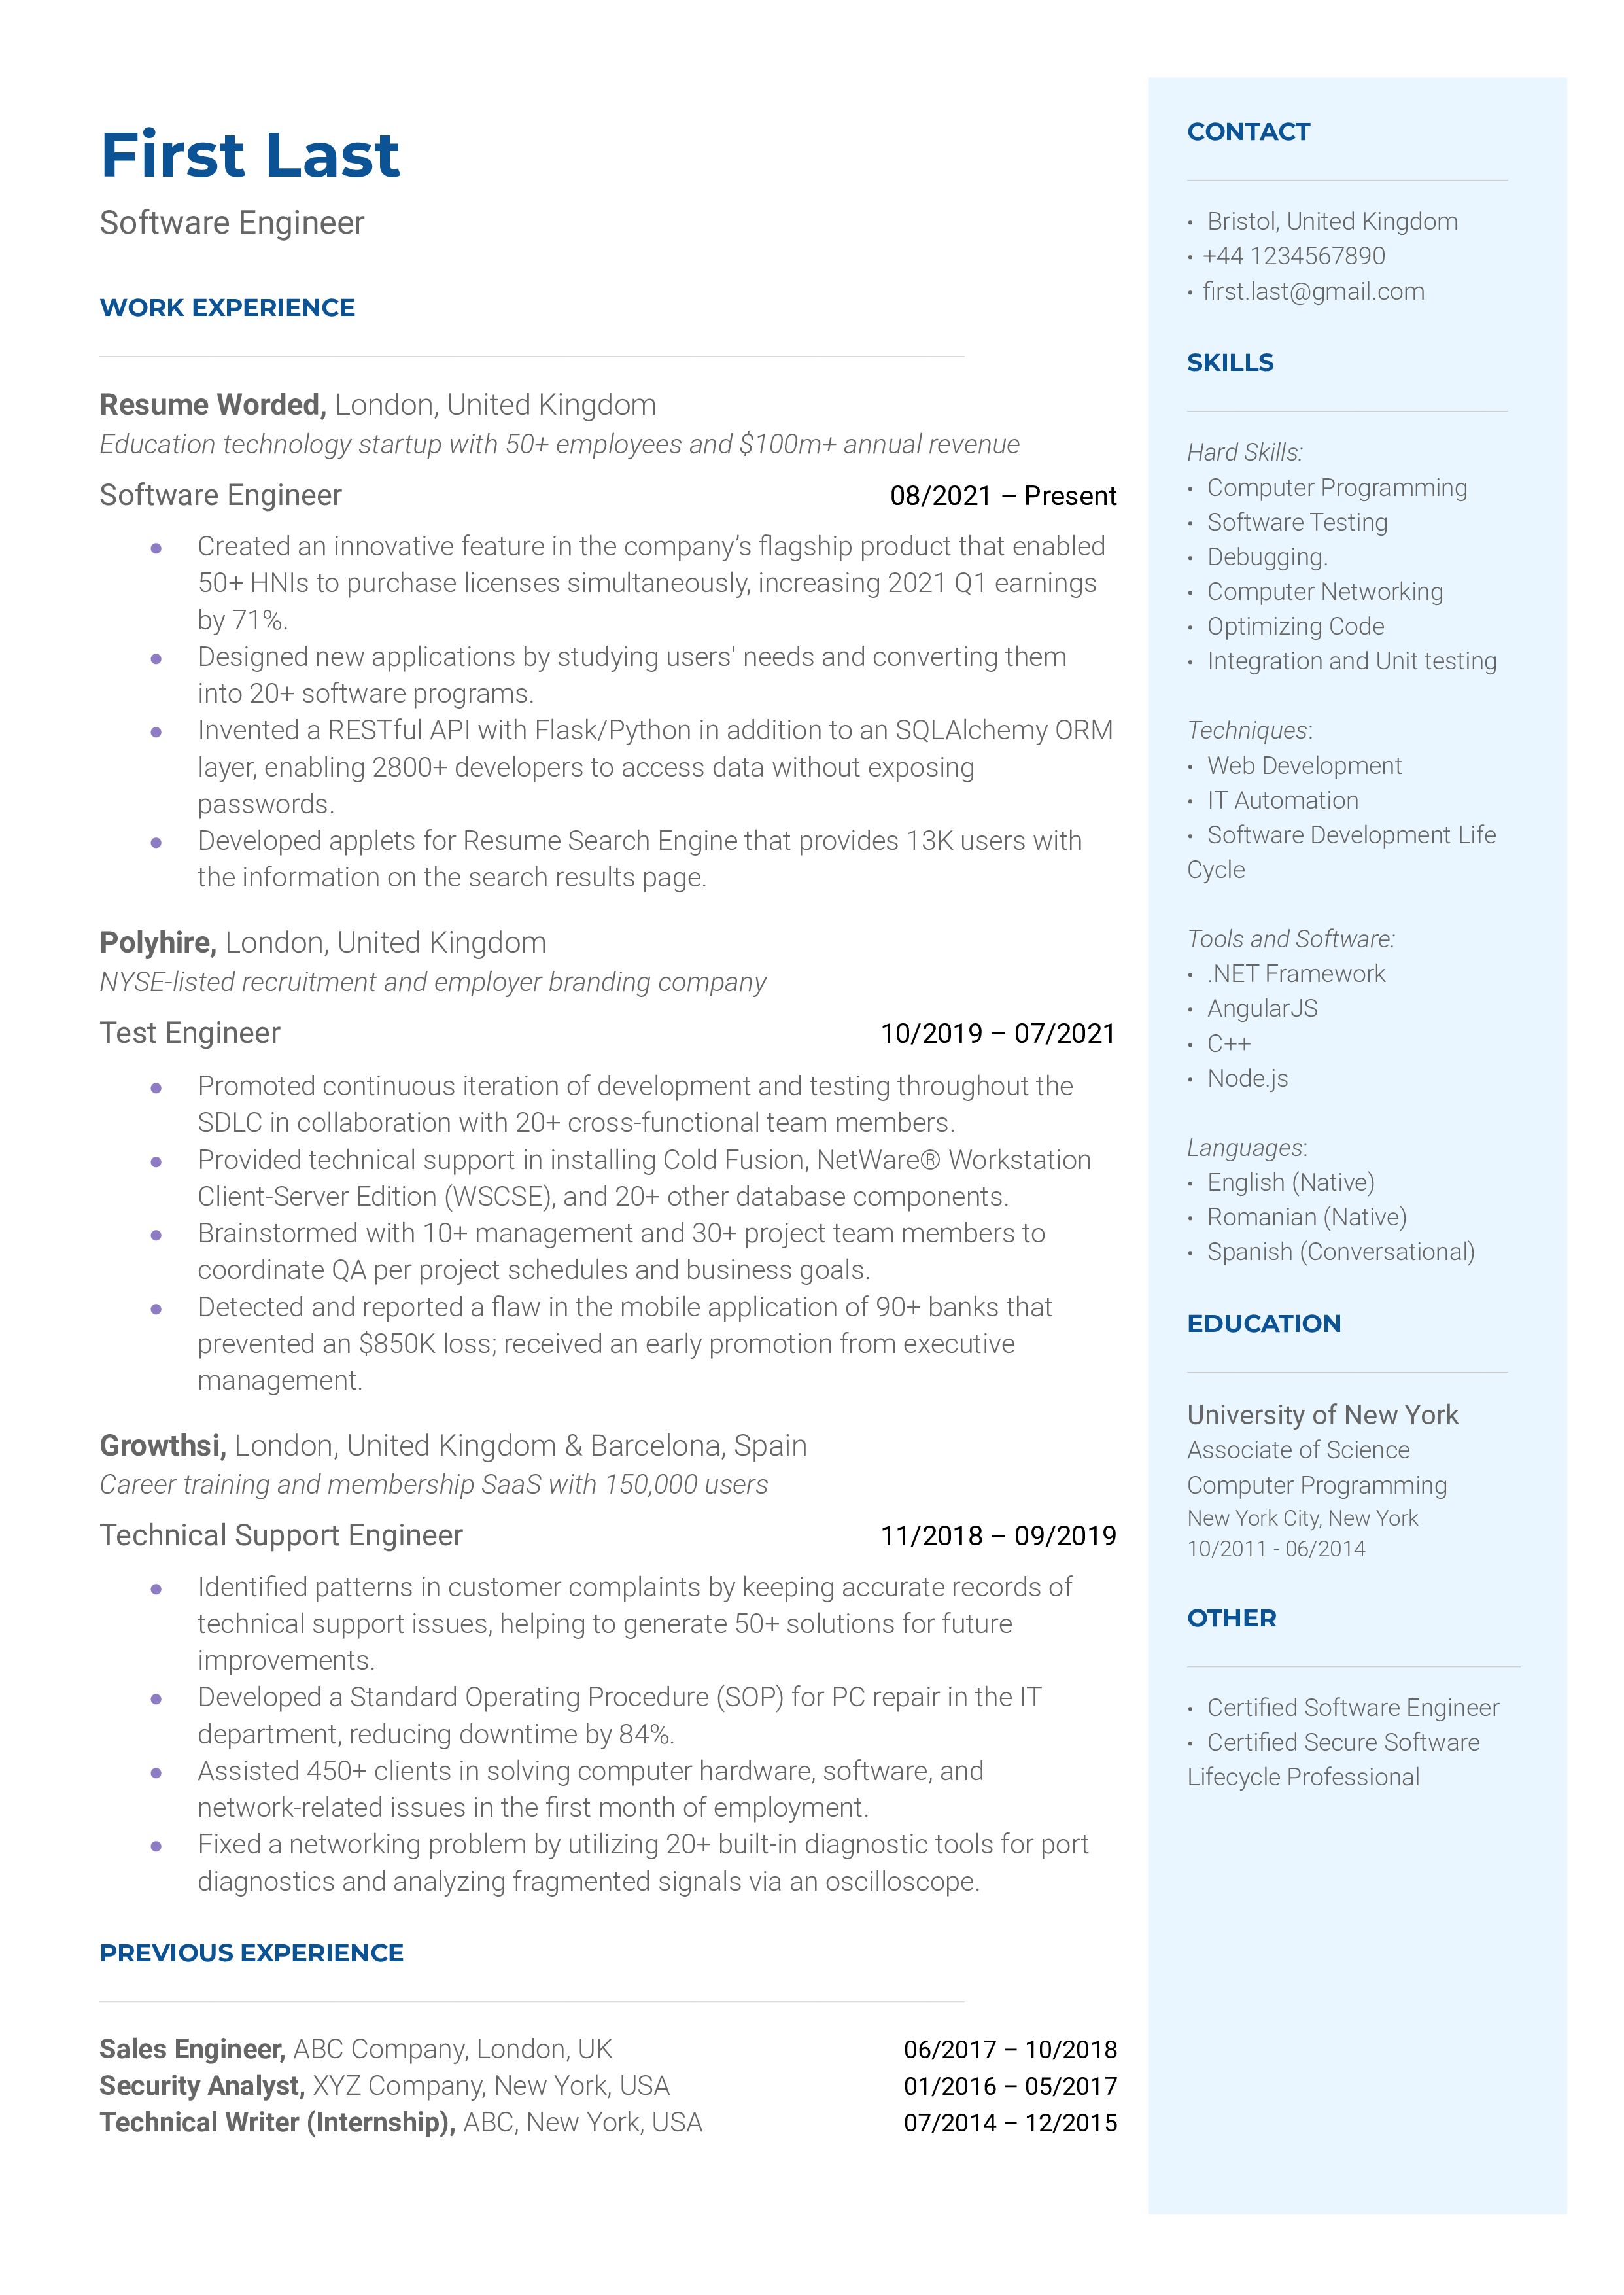 Software engineer CV showcasing skills, projects, and tech stack.